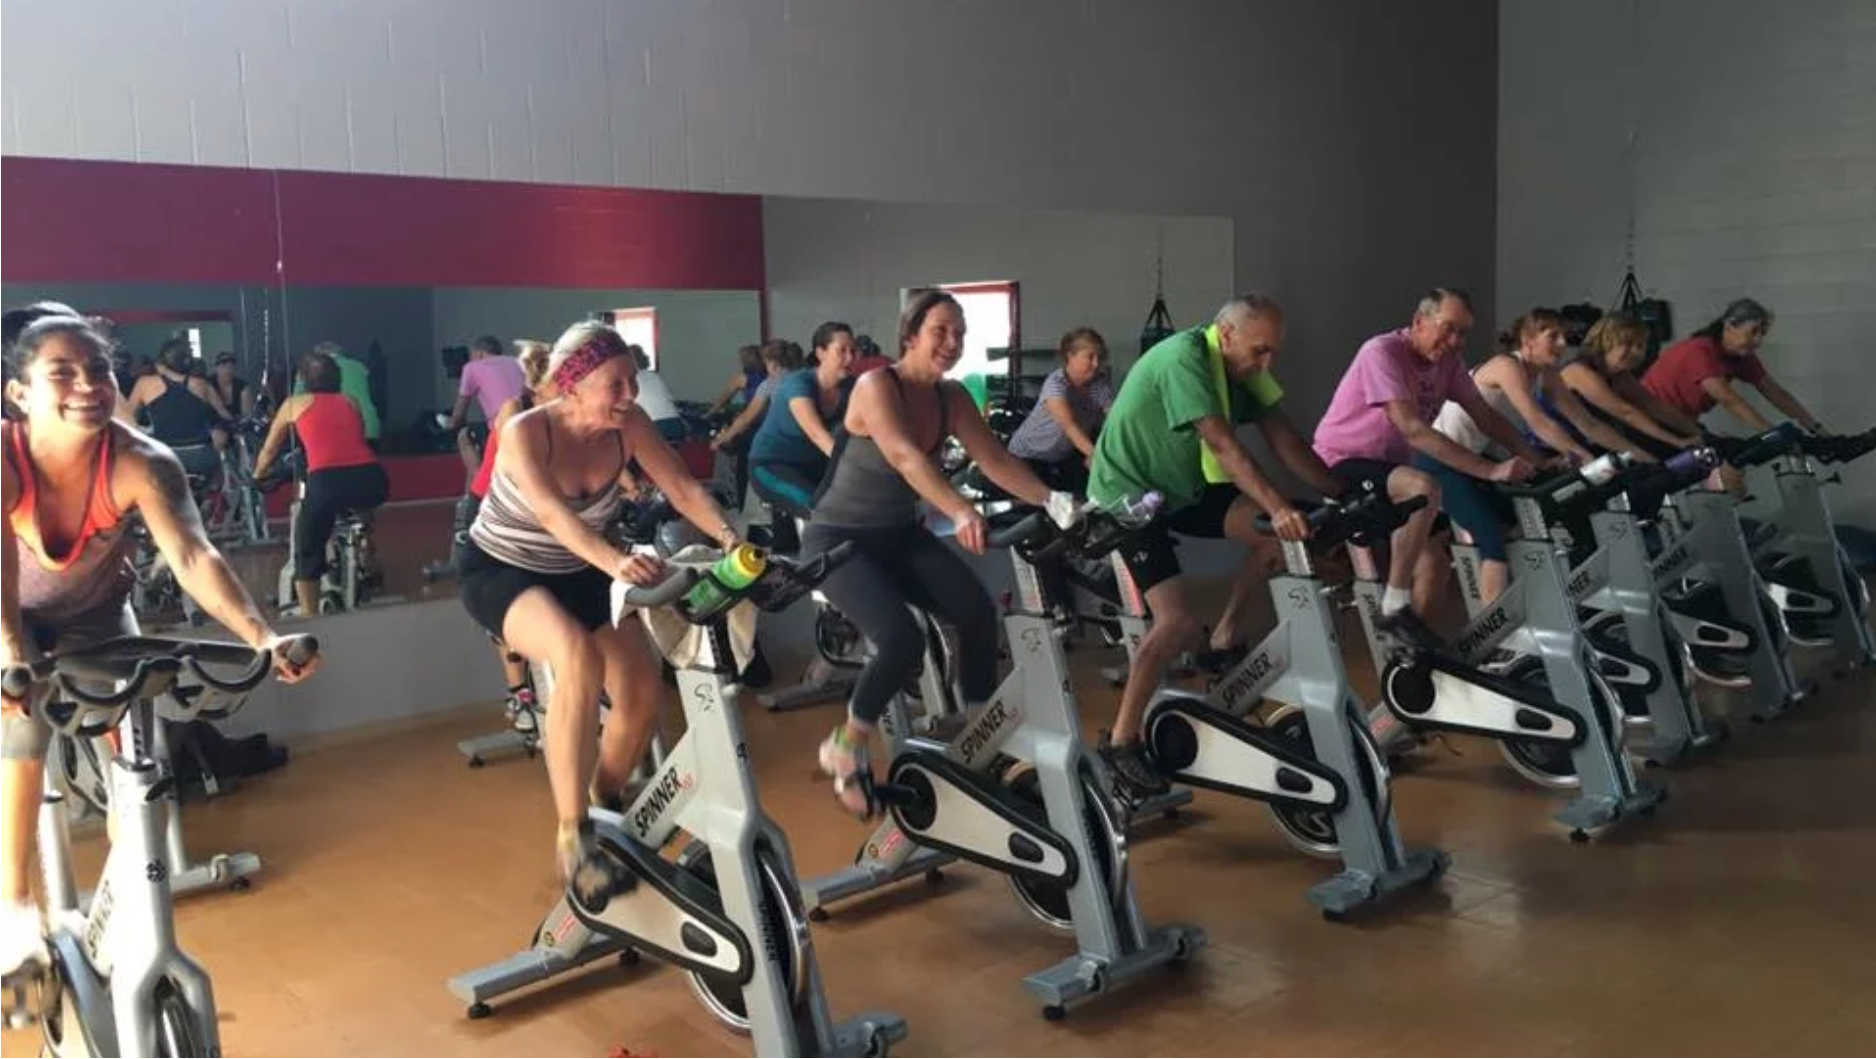 People on stationary bikes enjoying a spin class at High Altitude Health and Fitness in Taos, NM.